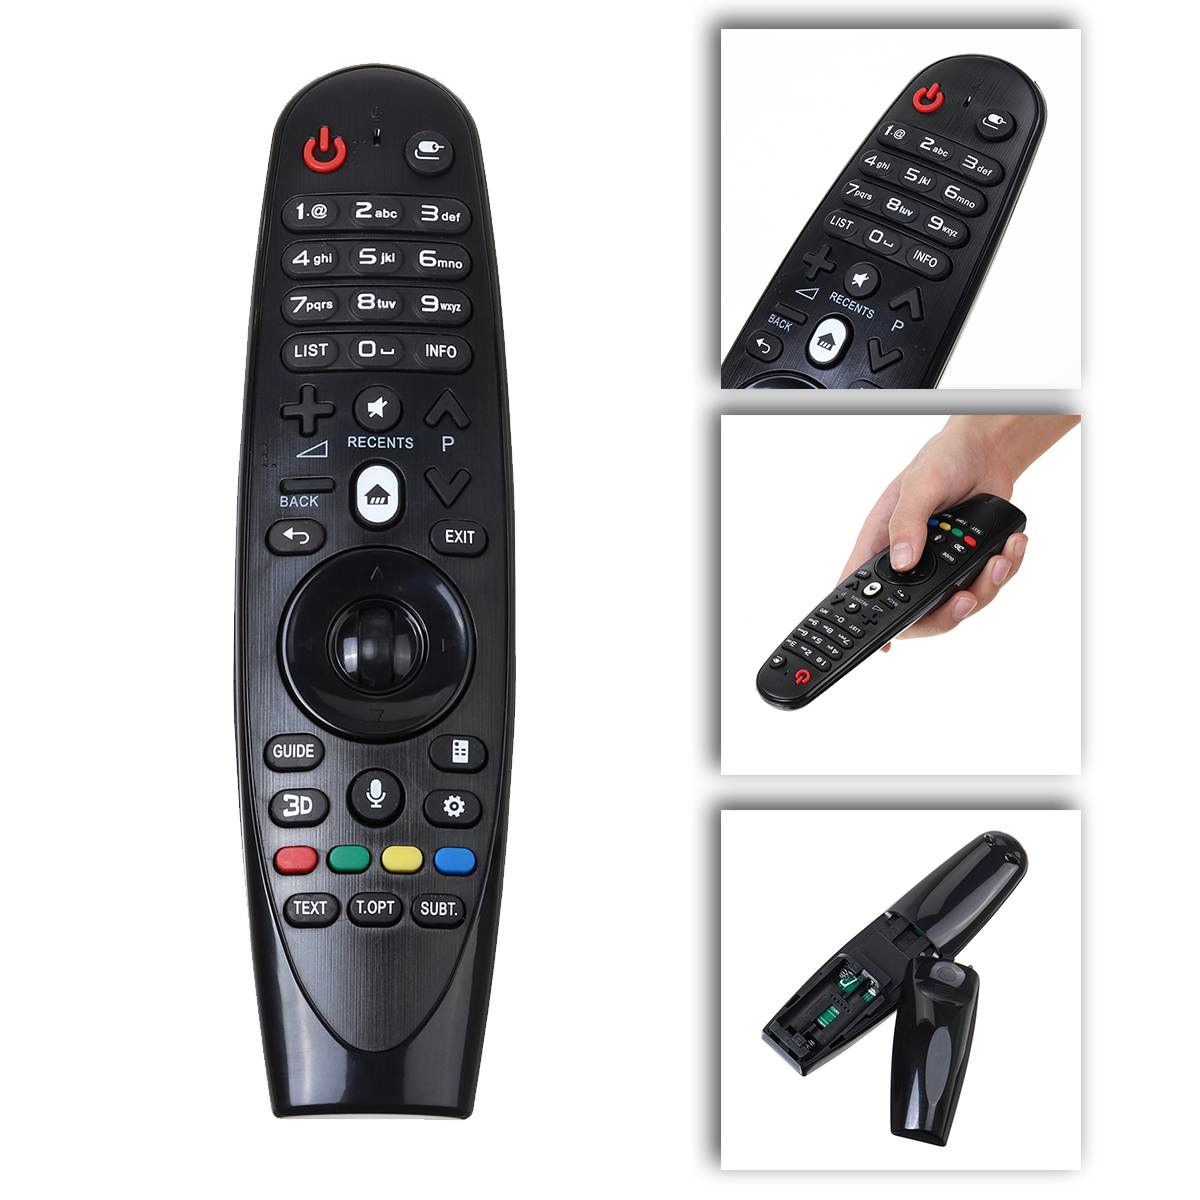 Smart-Wireless-TV-Remote-Control-Replacement-Only-for-LG-AM-HR600-AN-MR600-without-USB-1699898